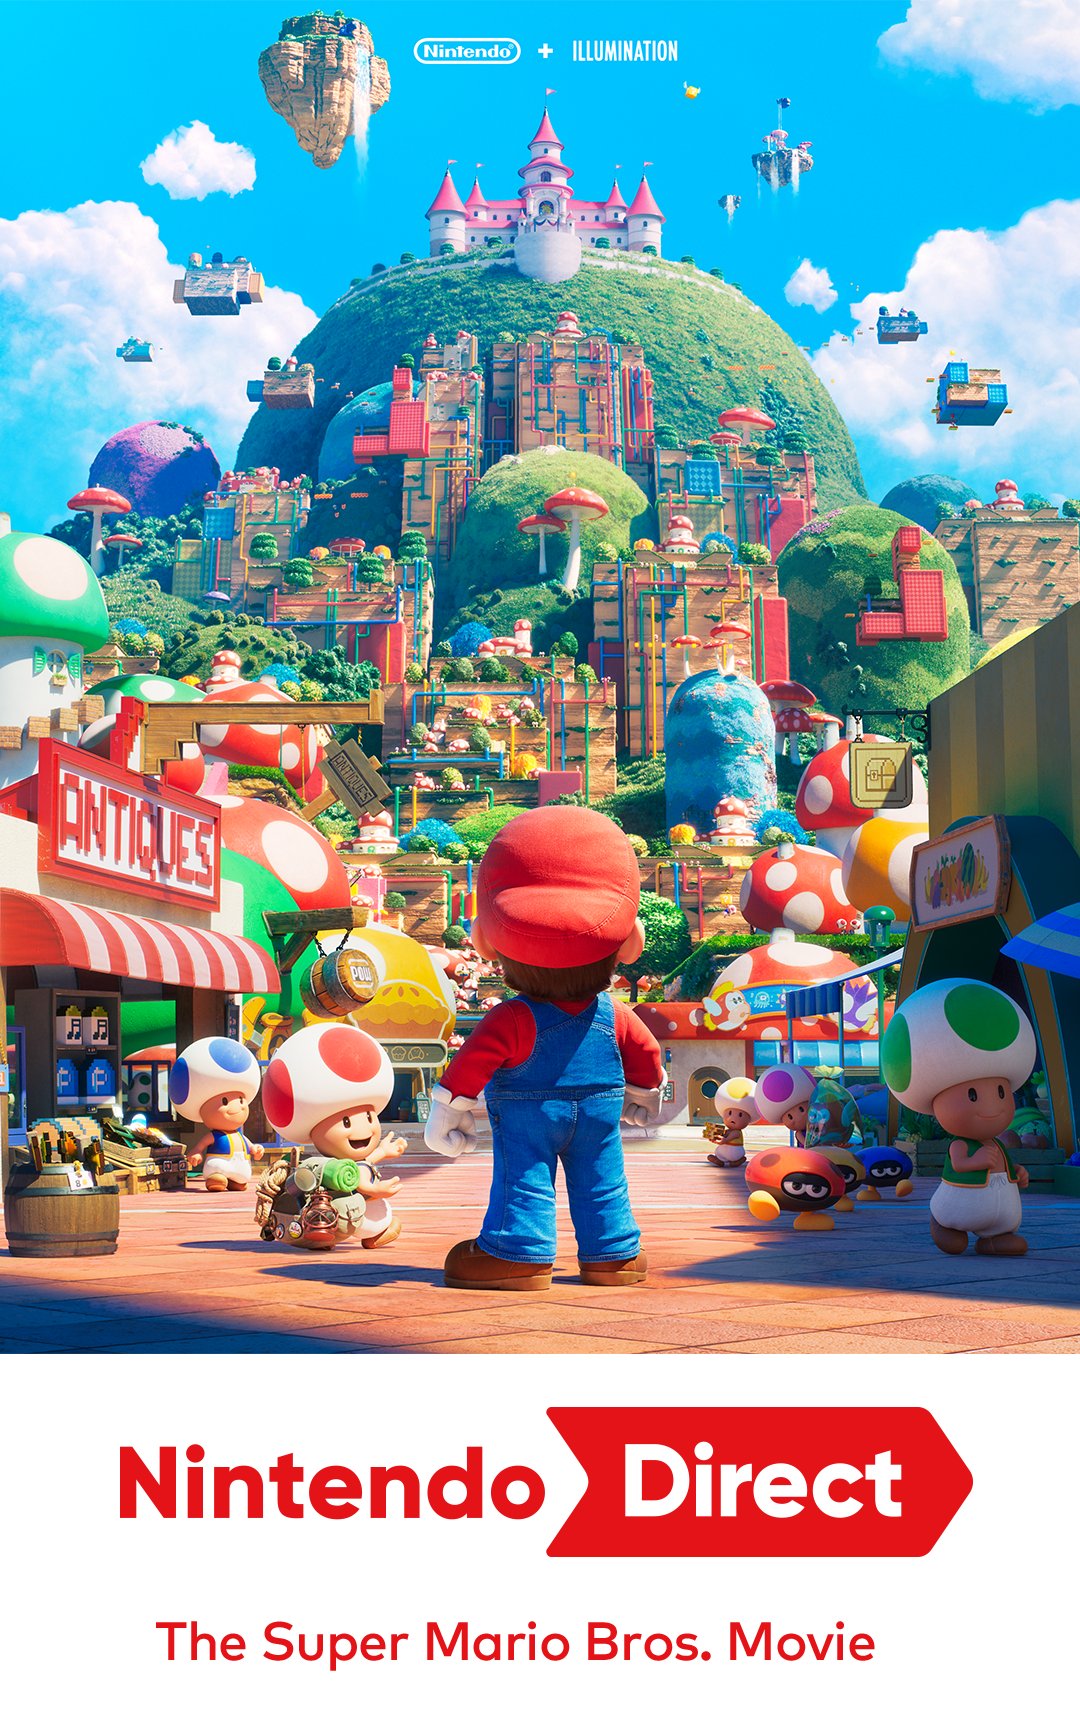 Nintendo is hosting a Direct this week to debut the Super Mario movie trailer